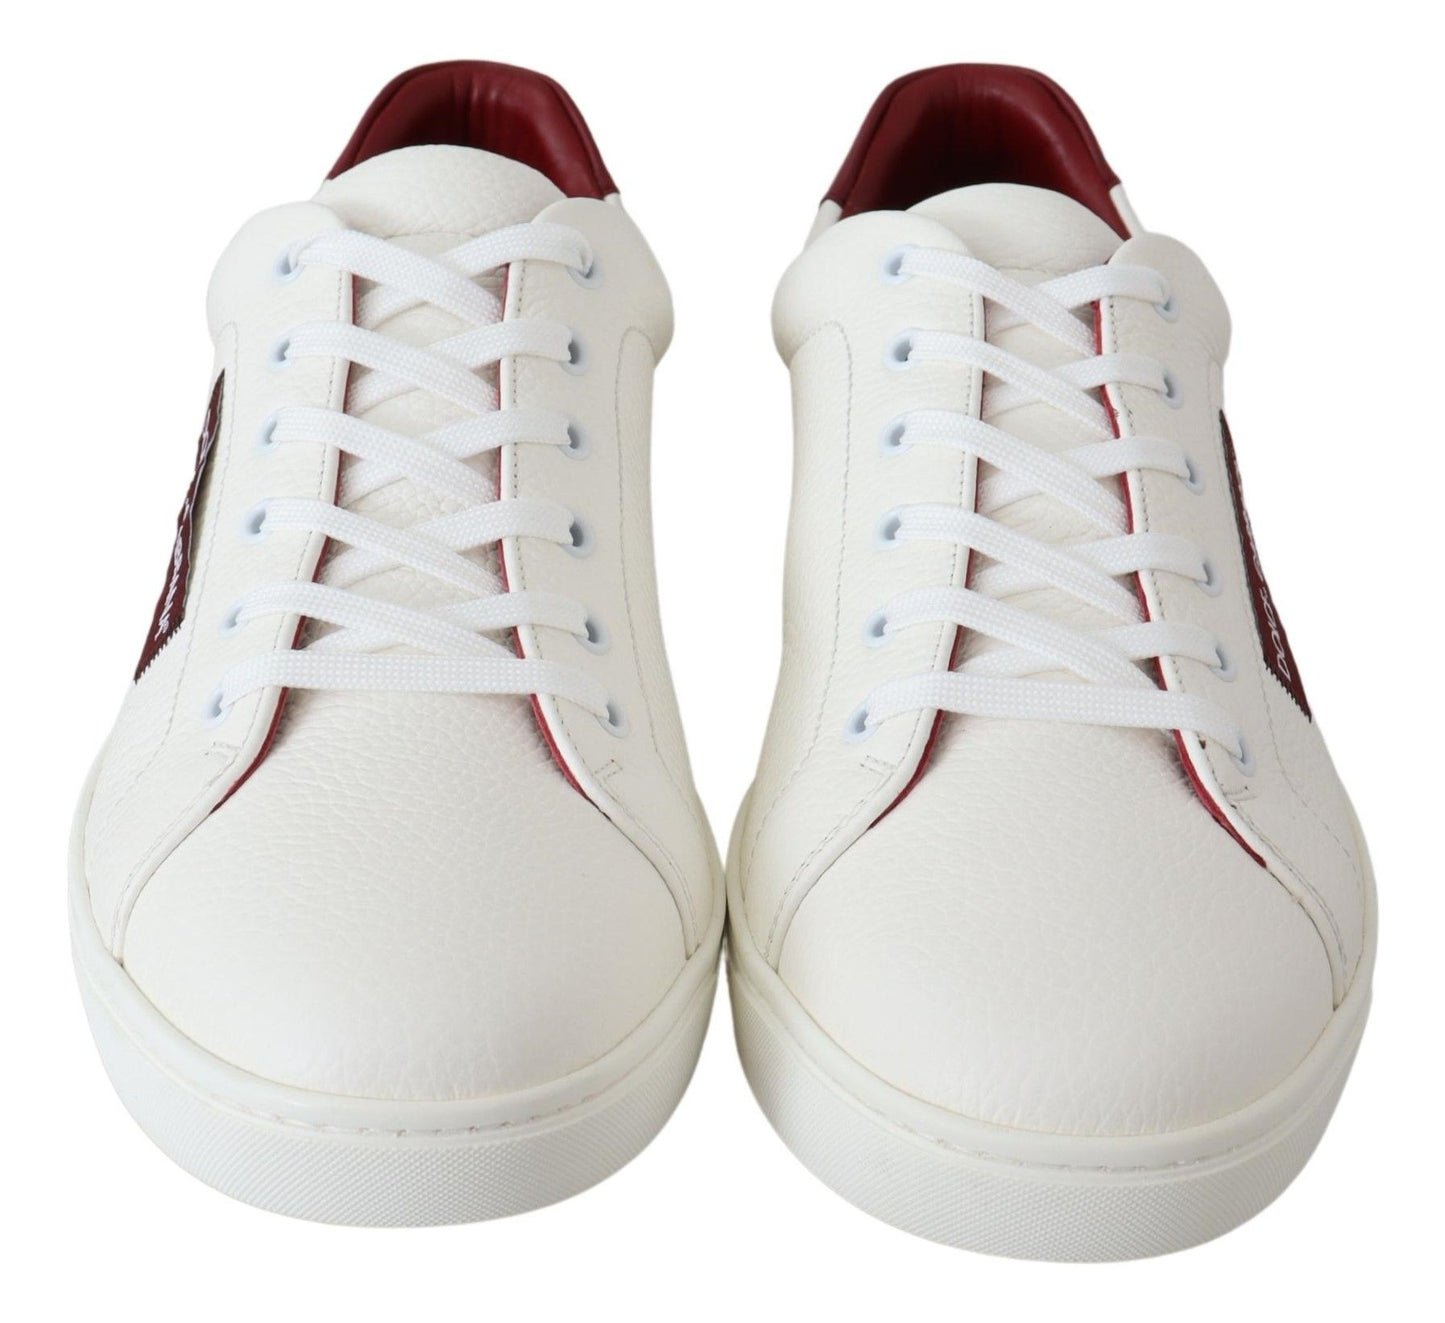 Elegant Low-Top Leather Sneakers in White & Bordeaux